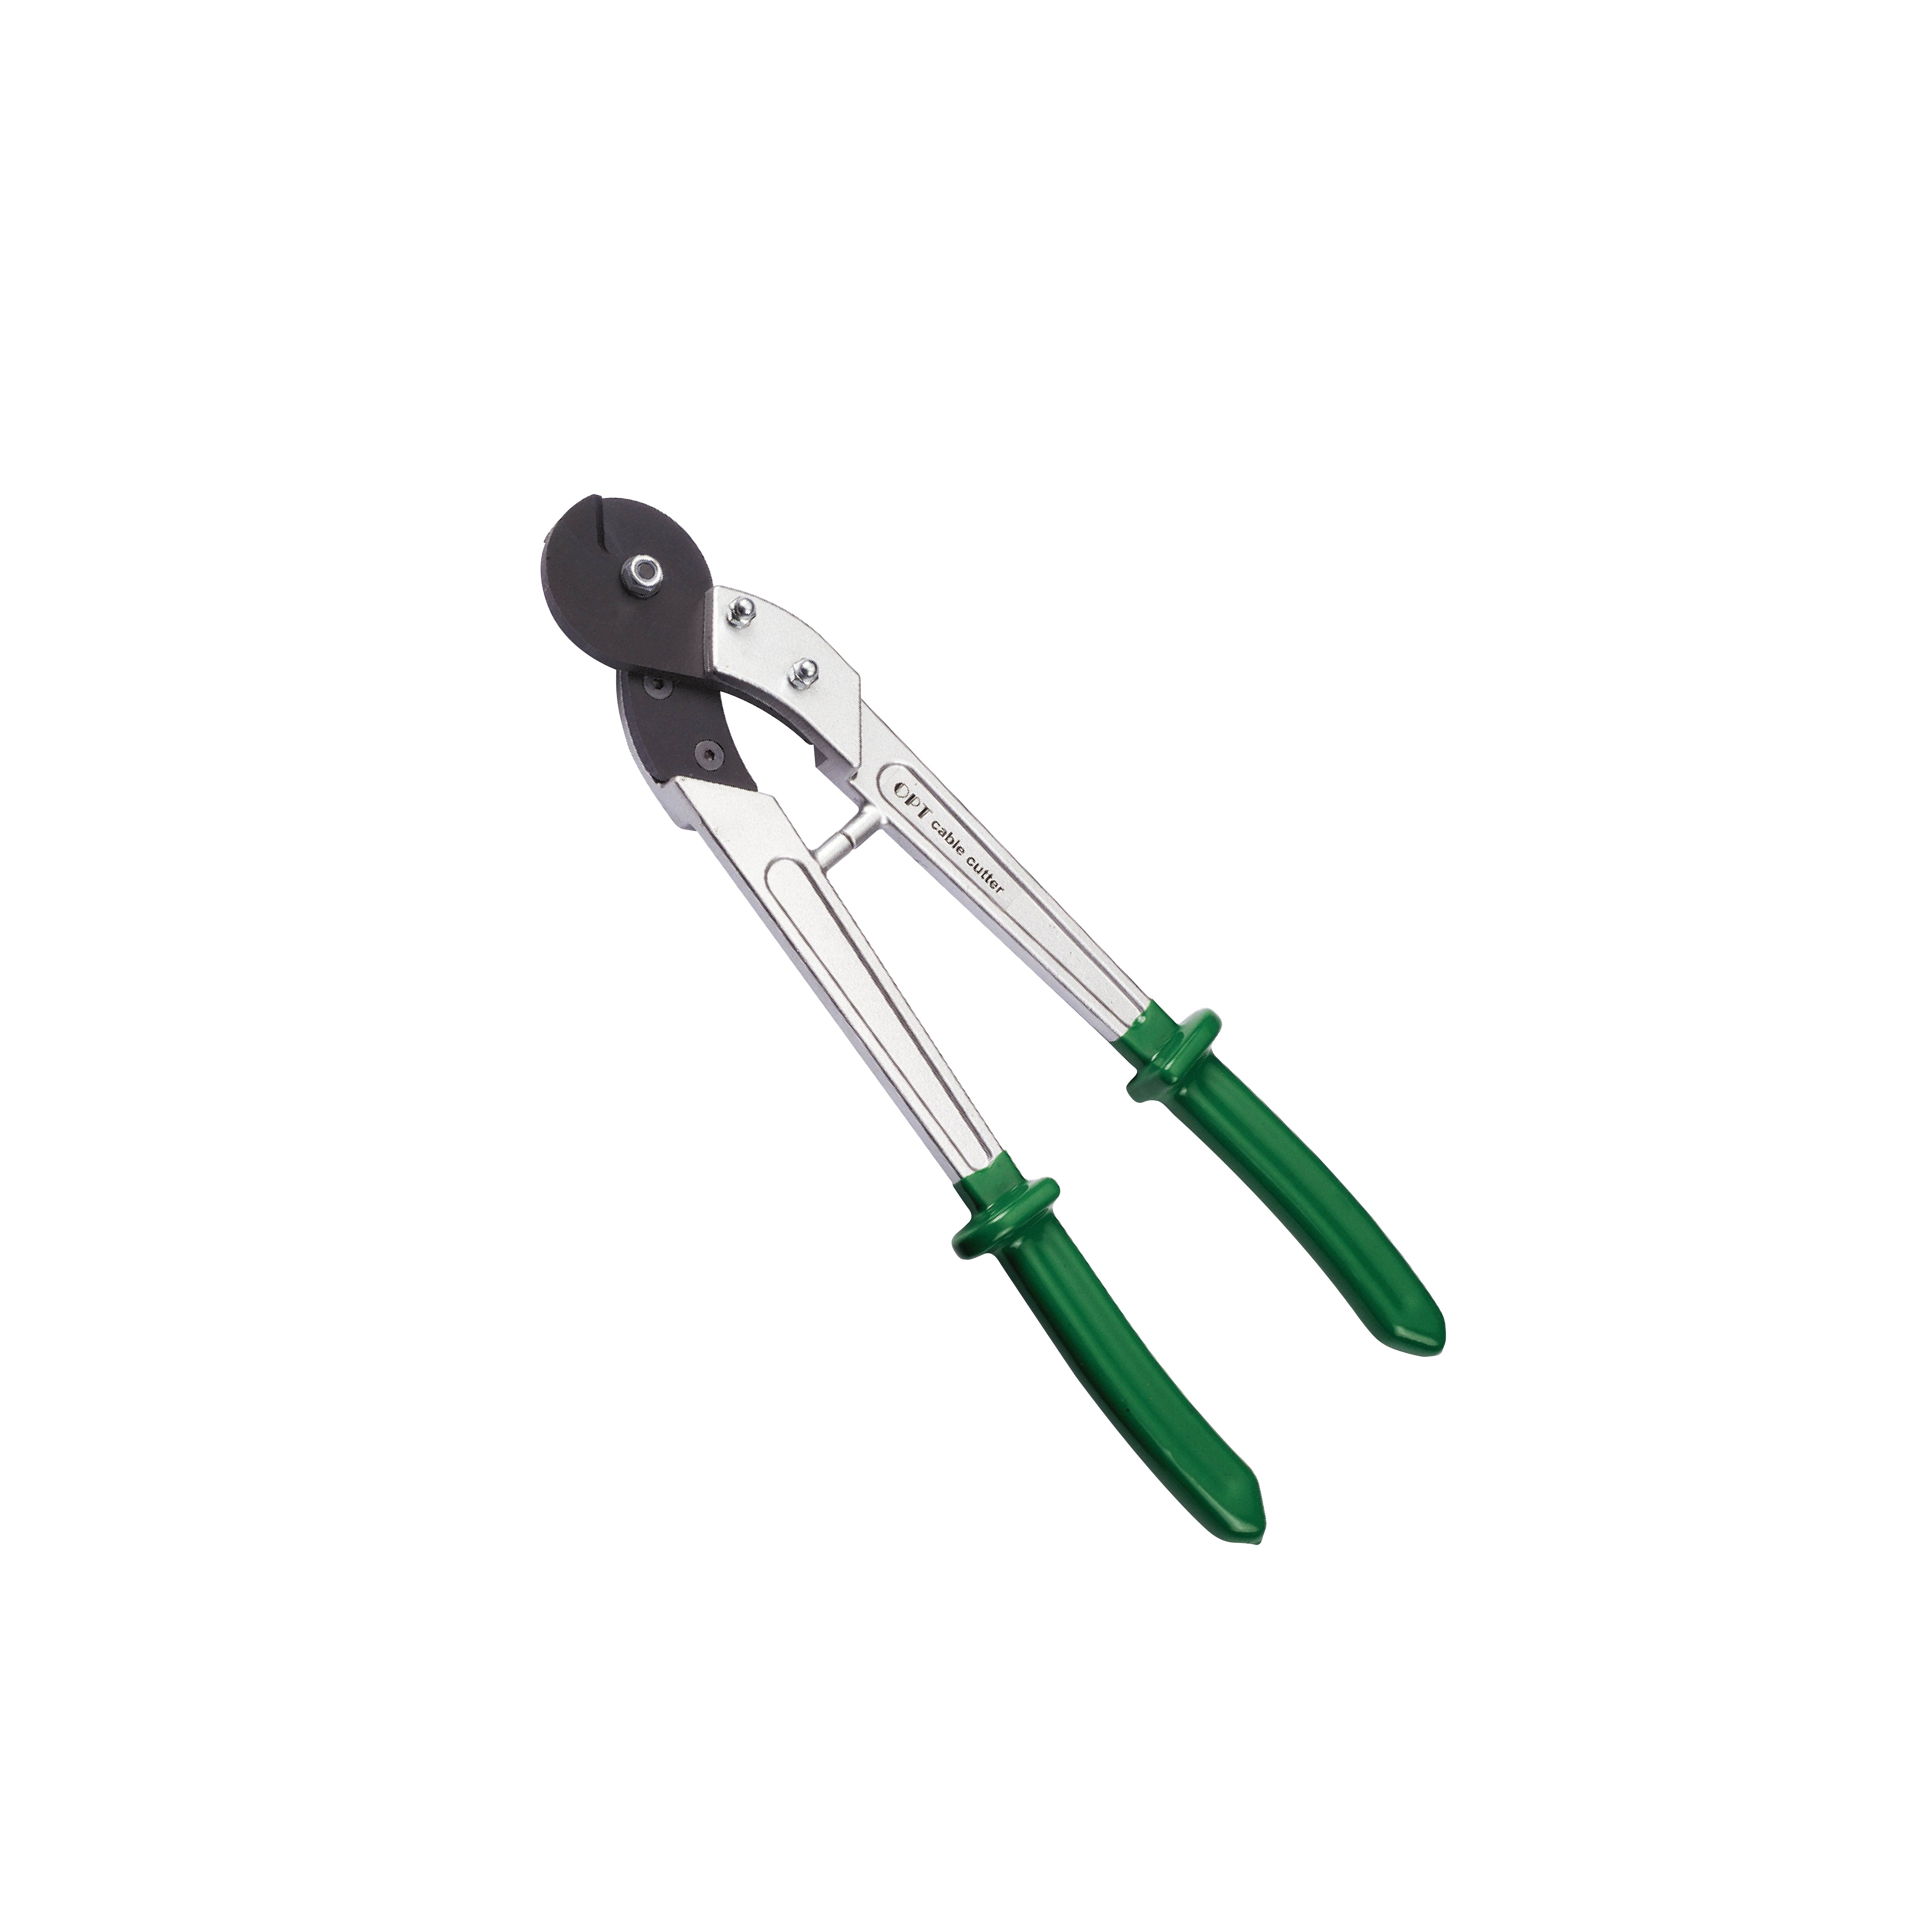 AC-190 HAND CABLE CUTTERS-AC-190 